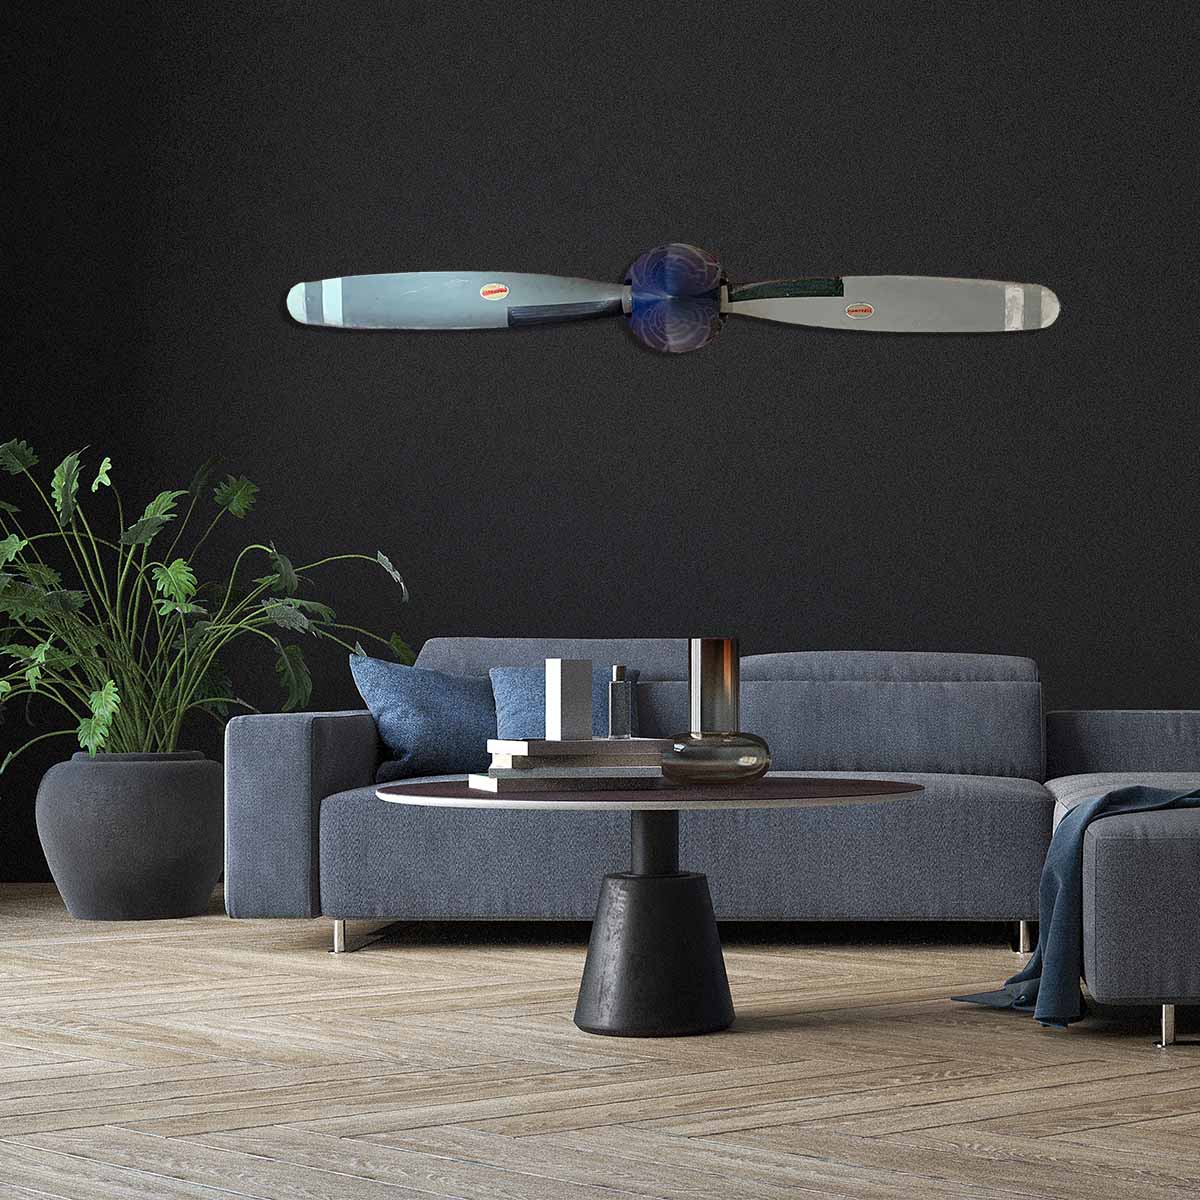 Two-bladed Hartzell propeller with spinner in original colours, mounted on a wall in a modern living room.